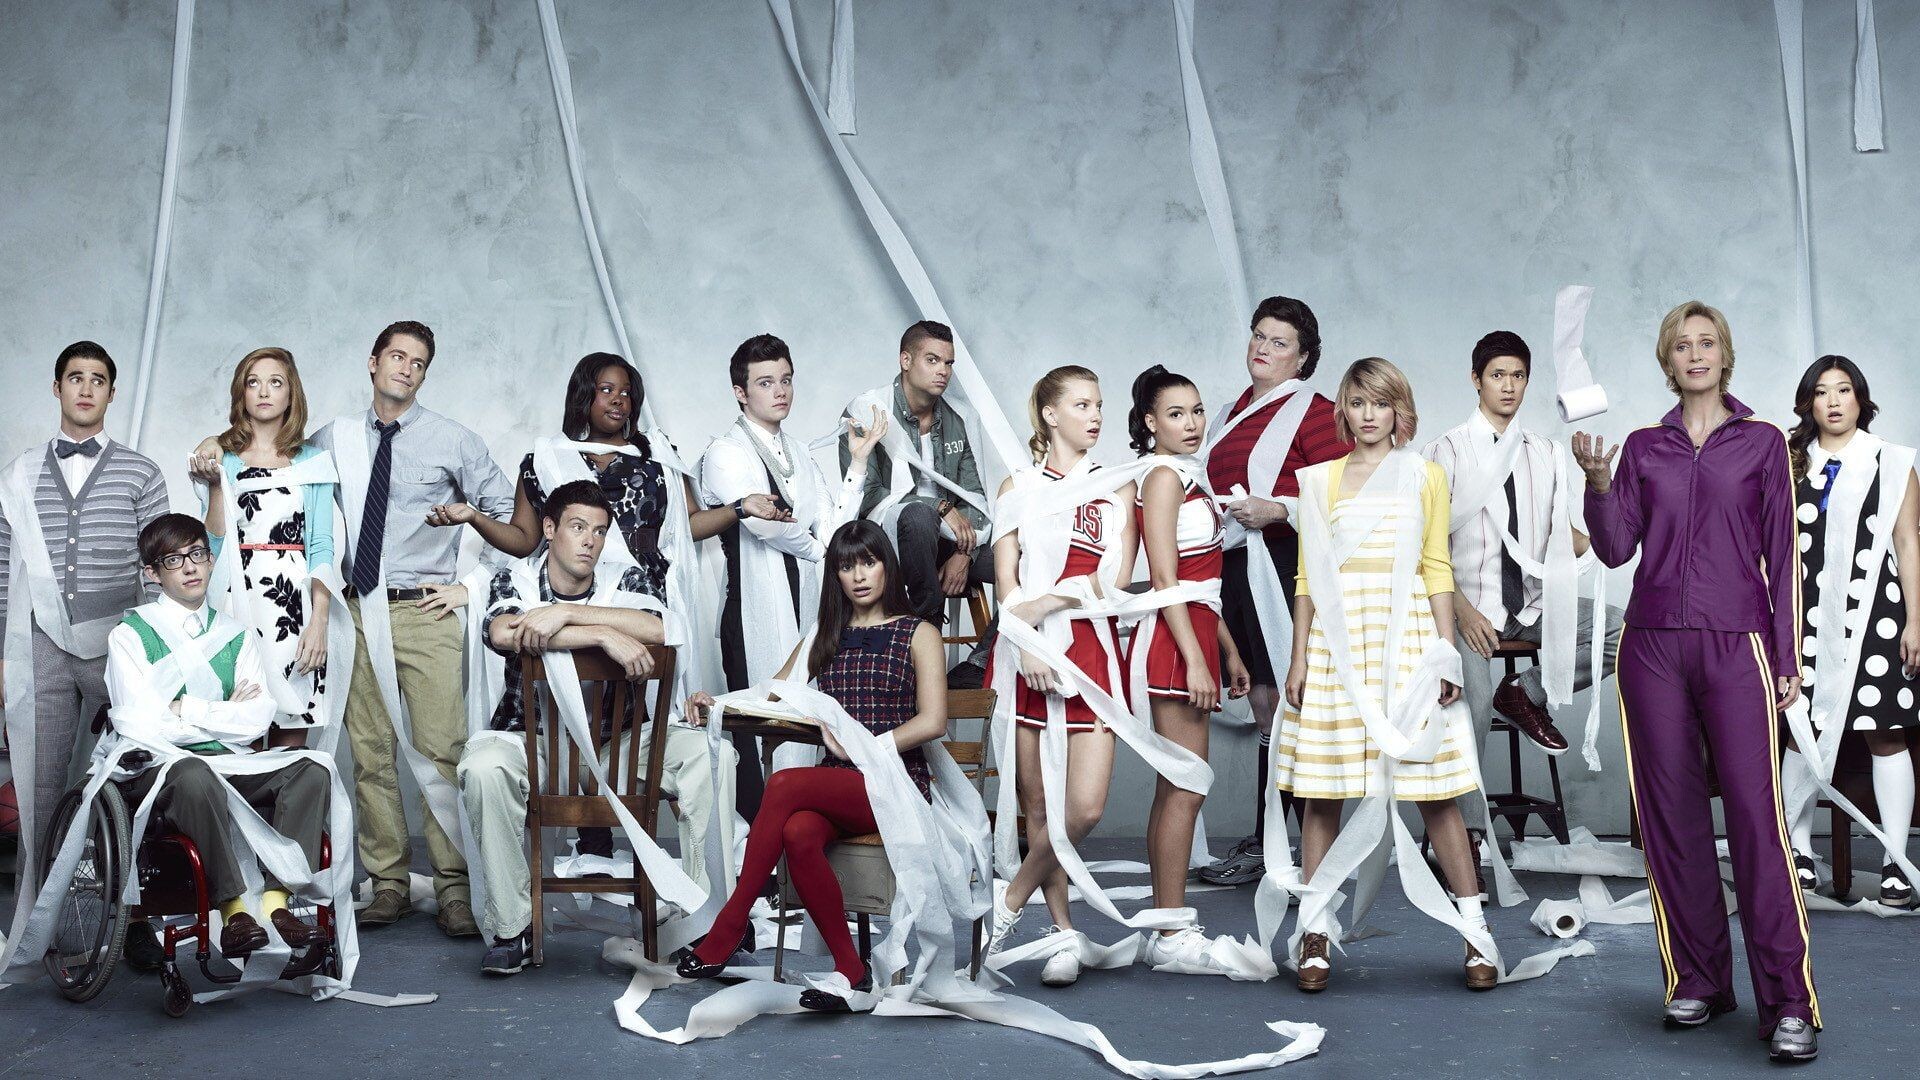 Glee (TV series): An American comedy-drama show telling about the students musical group which competes as a show choir. 1920x1080 Full HD Background.